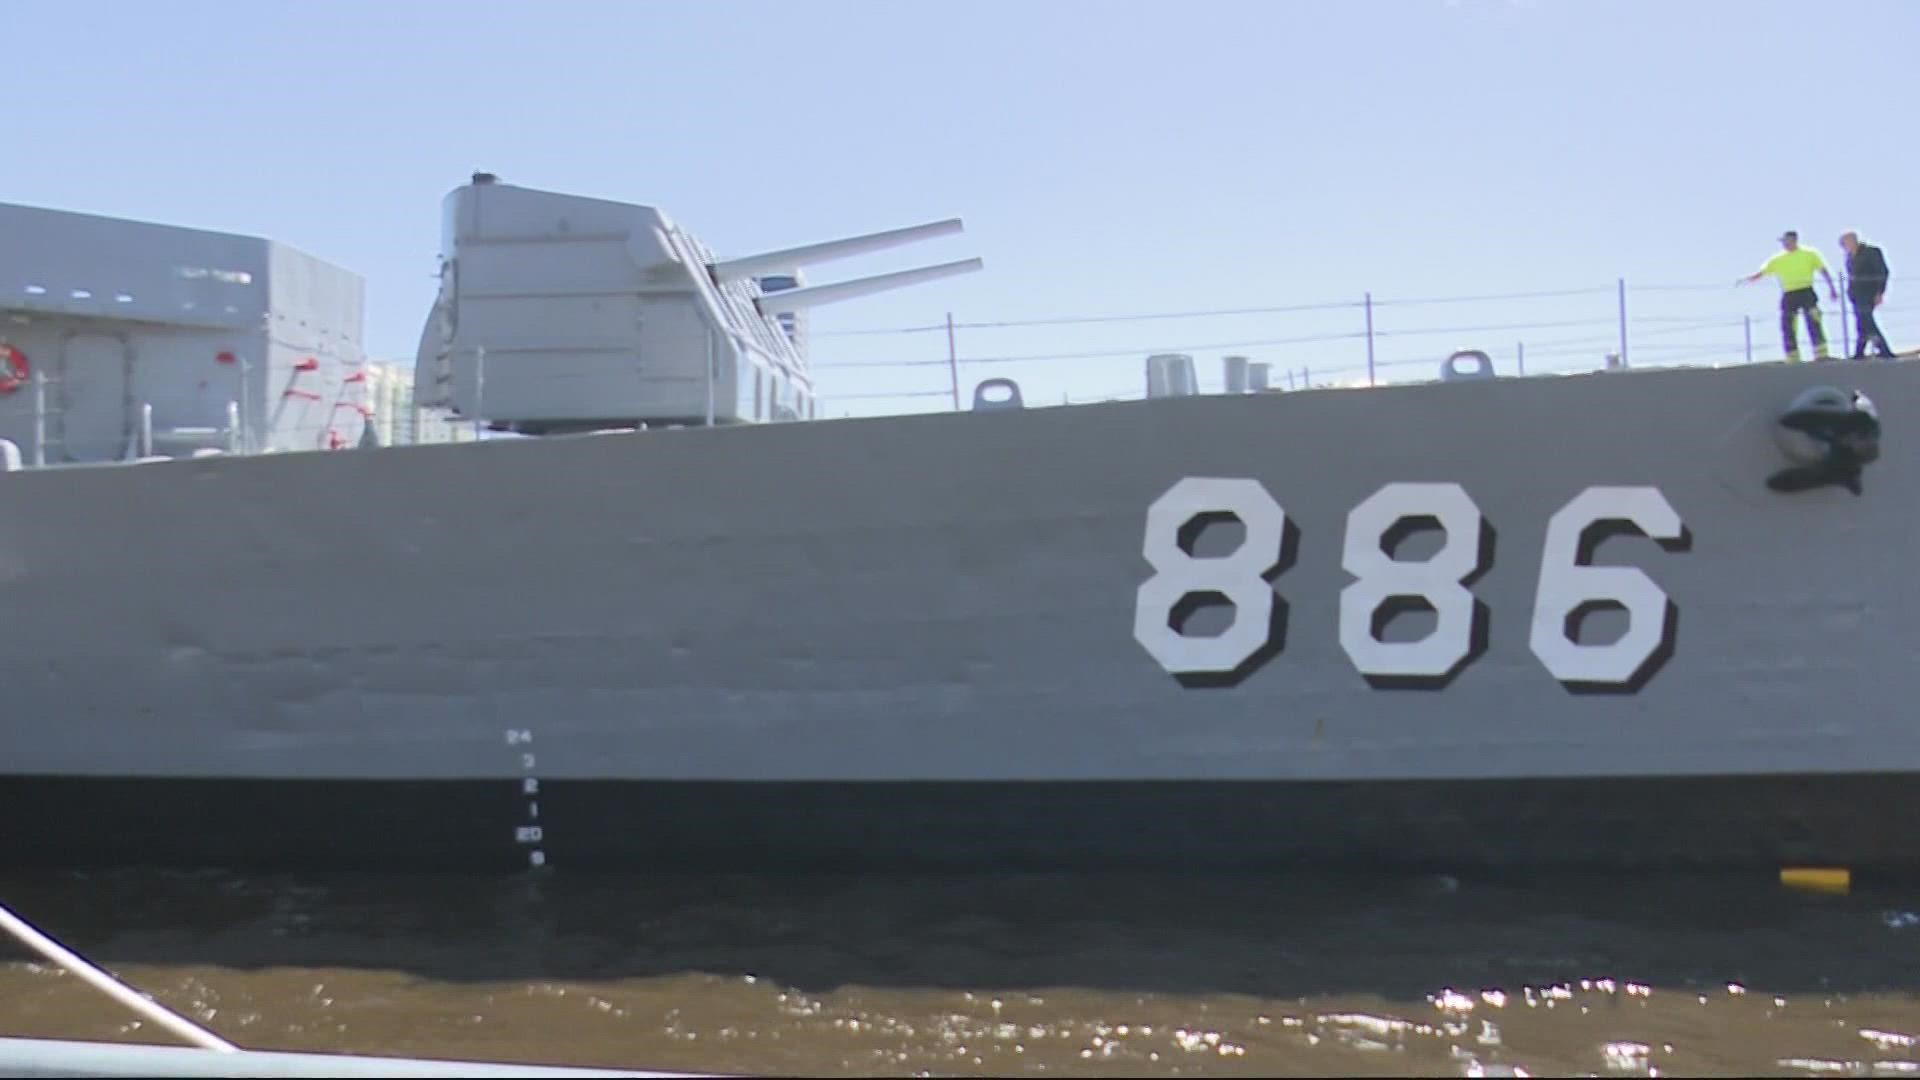 Volunteers and veterans have been restoring the ship since March. It is finally ready to be opened to the public.